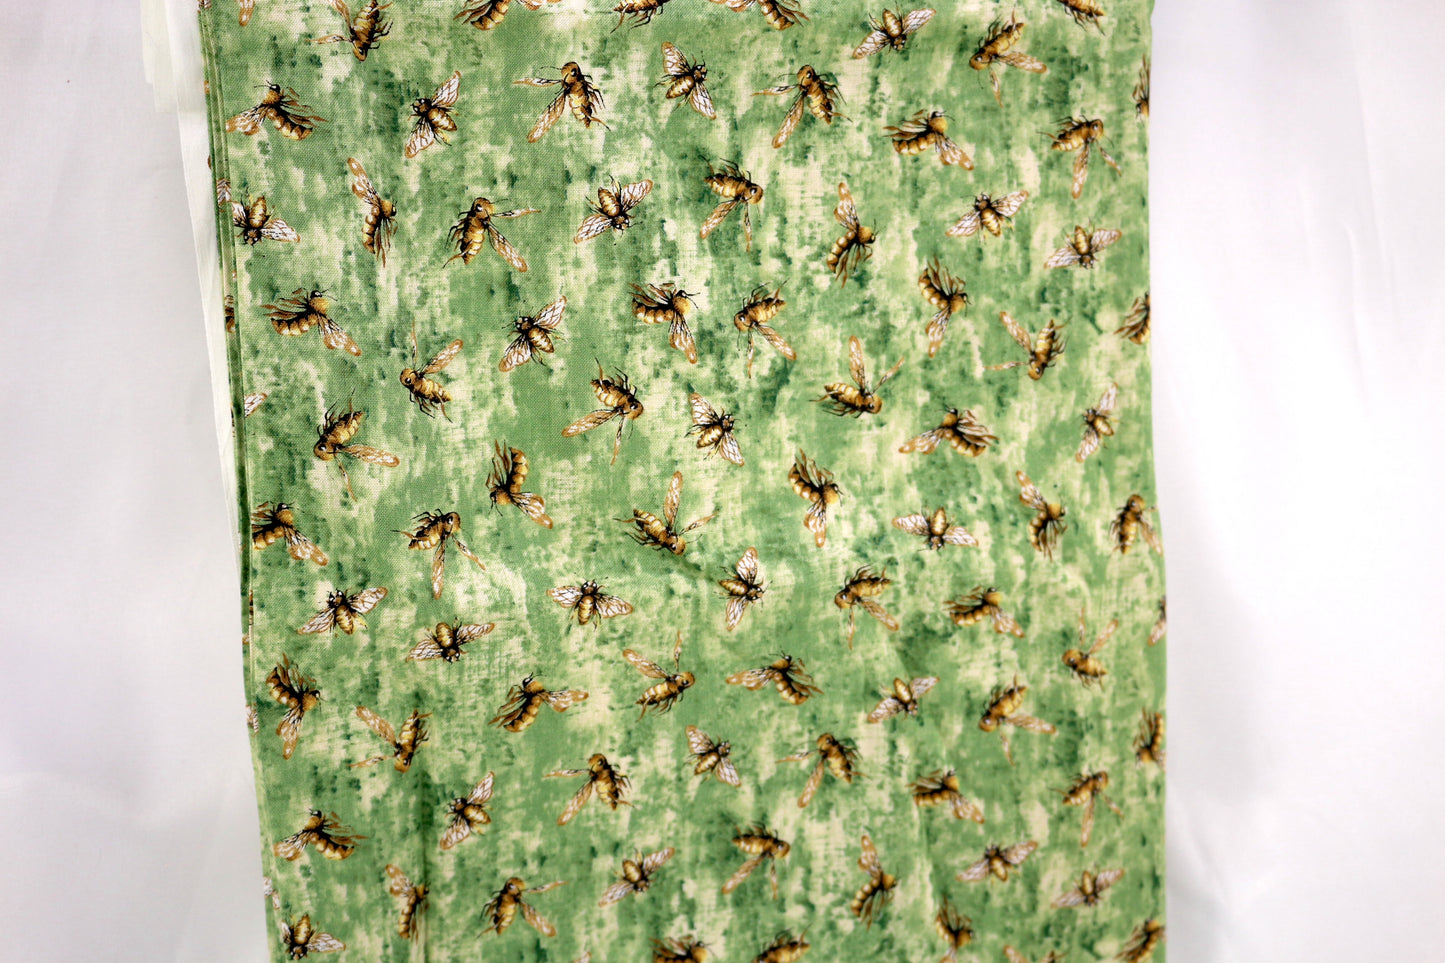 Wasps On the Grass Cotton Fabric 44" x 2 yds